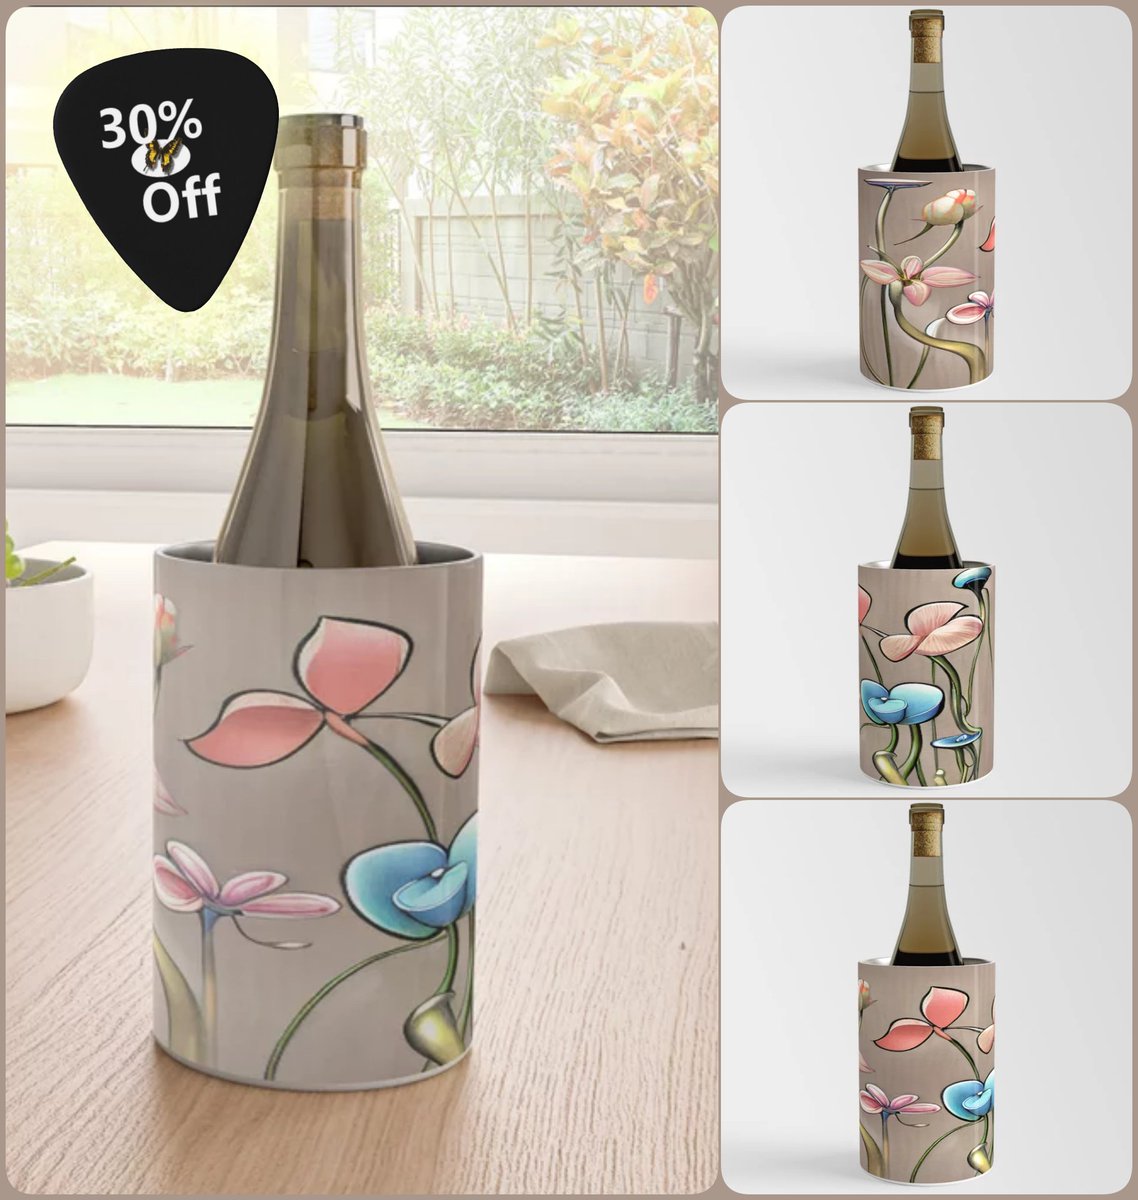 *SALE 30% Off* Joyful Vista Wine Chiller~by Art_Falaxy ~Art Exquisite!~ #coasters #gifts #trays #mugs #coffee #society6 #travel #artfalaxy #art #accents #modern #trendy #wine #water #placemats #tablecloths #runners society6.com/product/joyful…